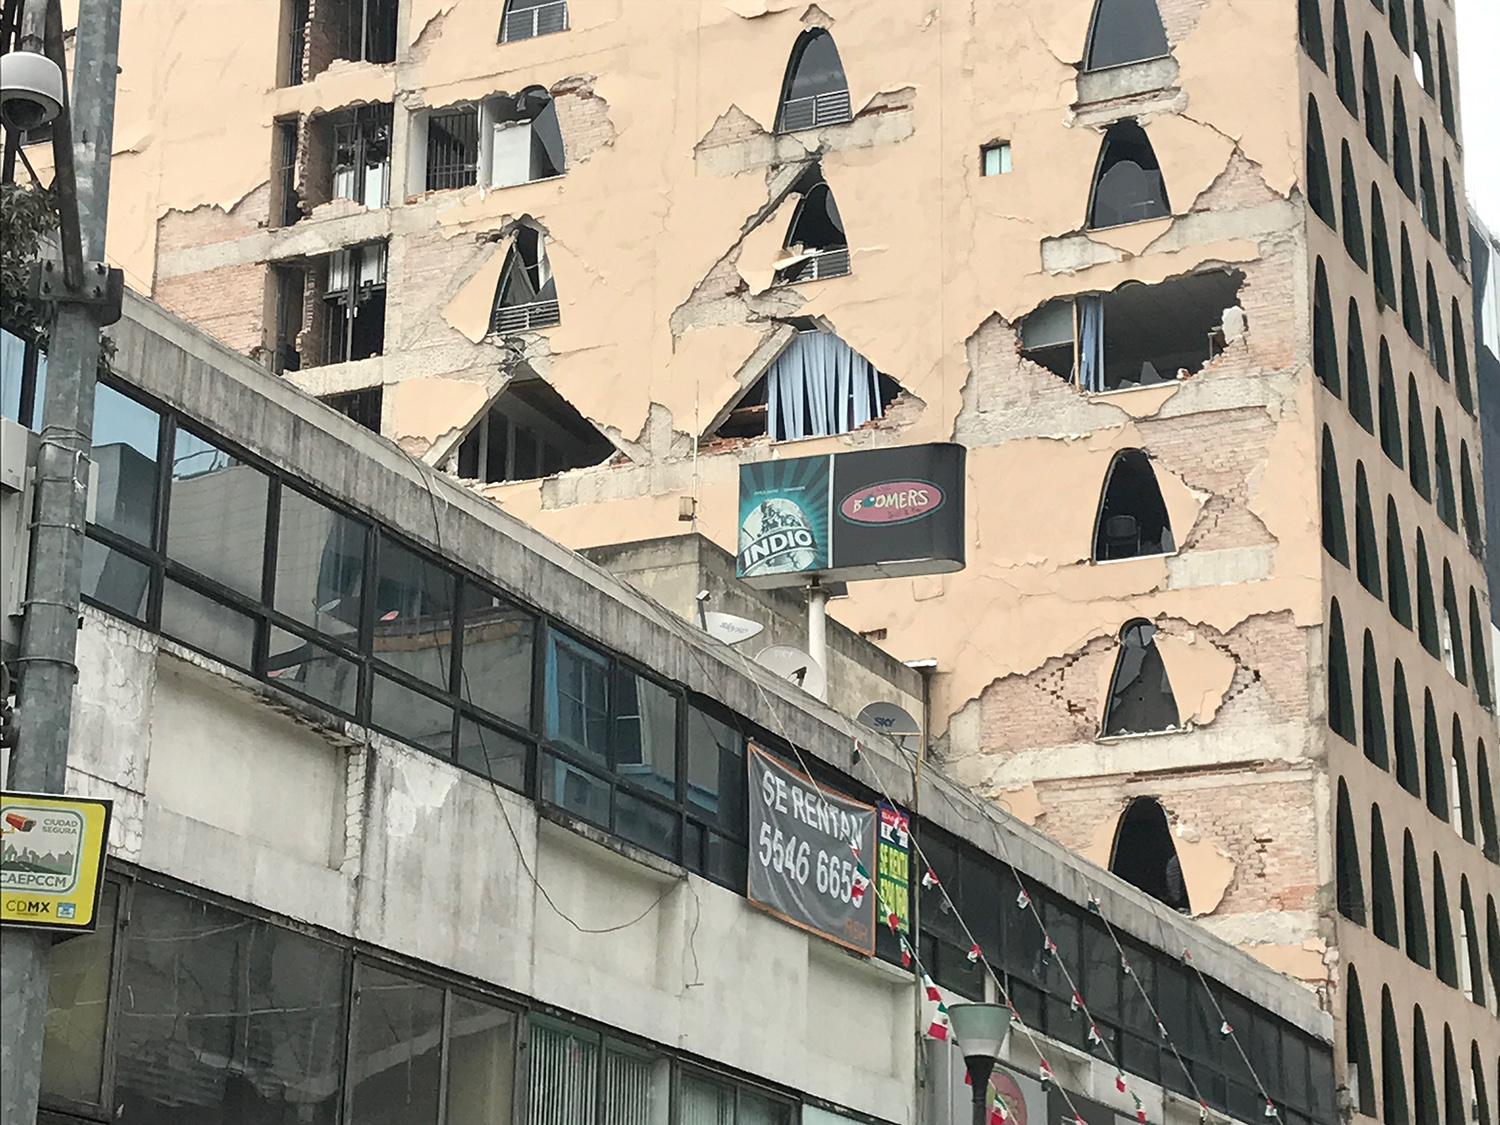 A hotel in Mexico City's Zona Rosa neighborhood lost much of its side wall but did not fall.